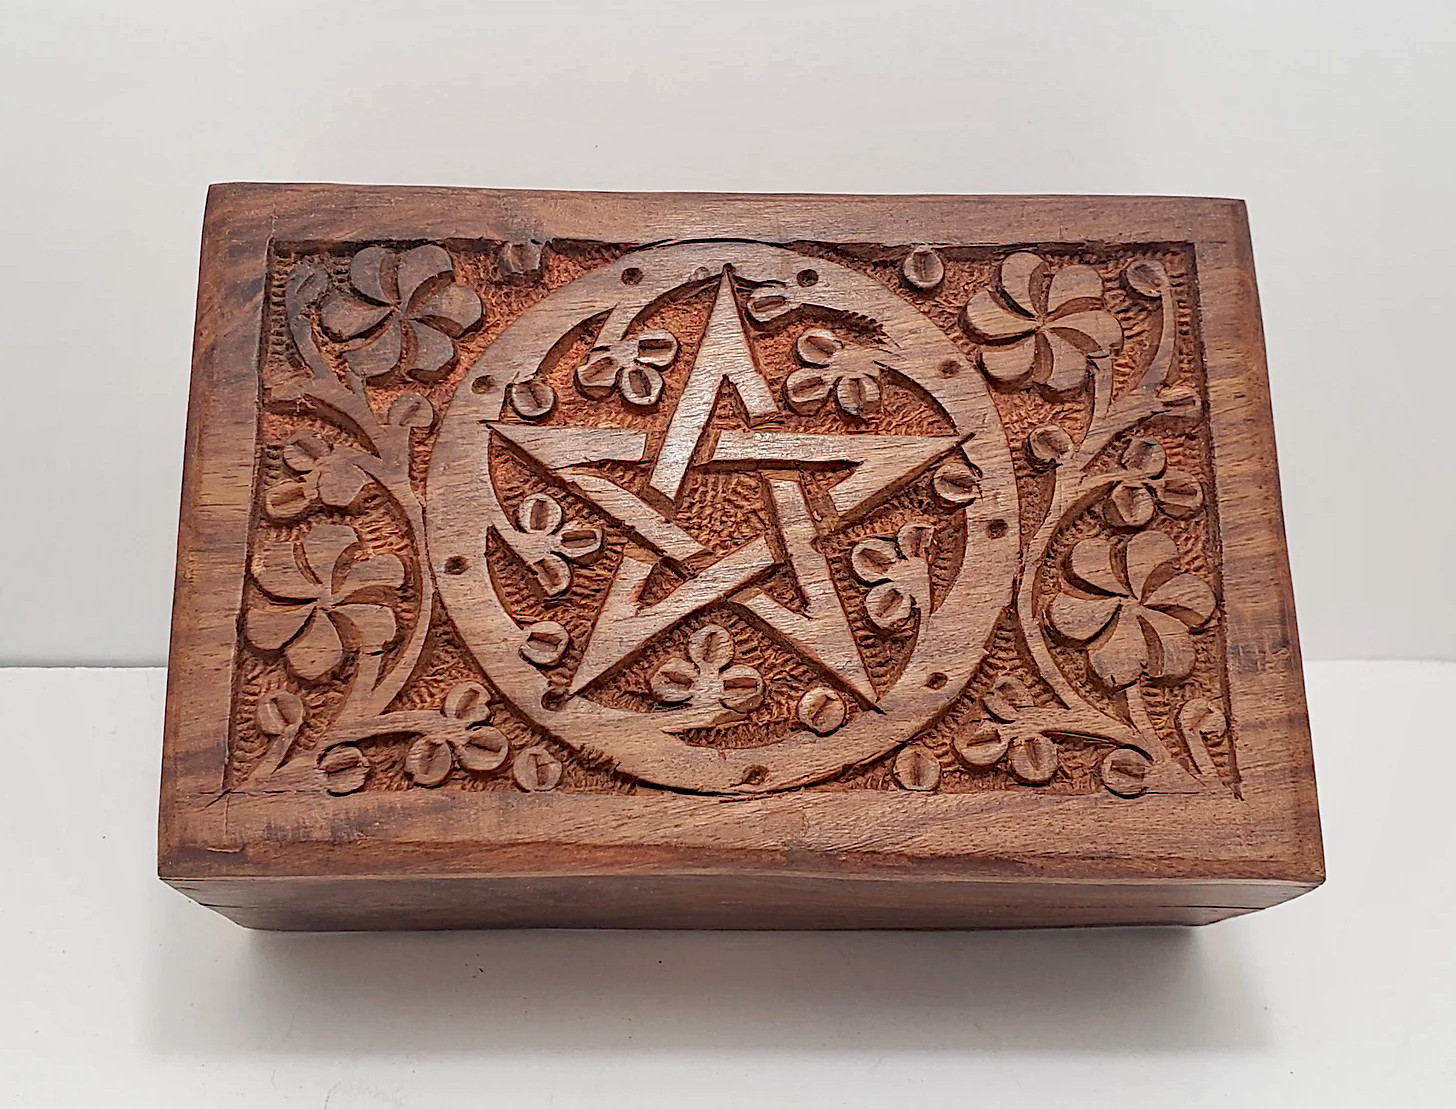 Pentacle floral carved wood box 4x6 Natural finish